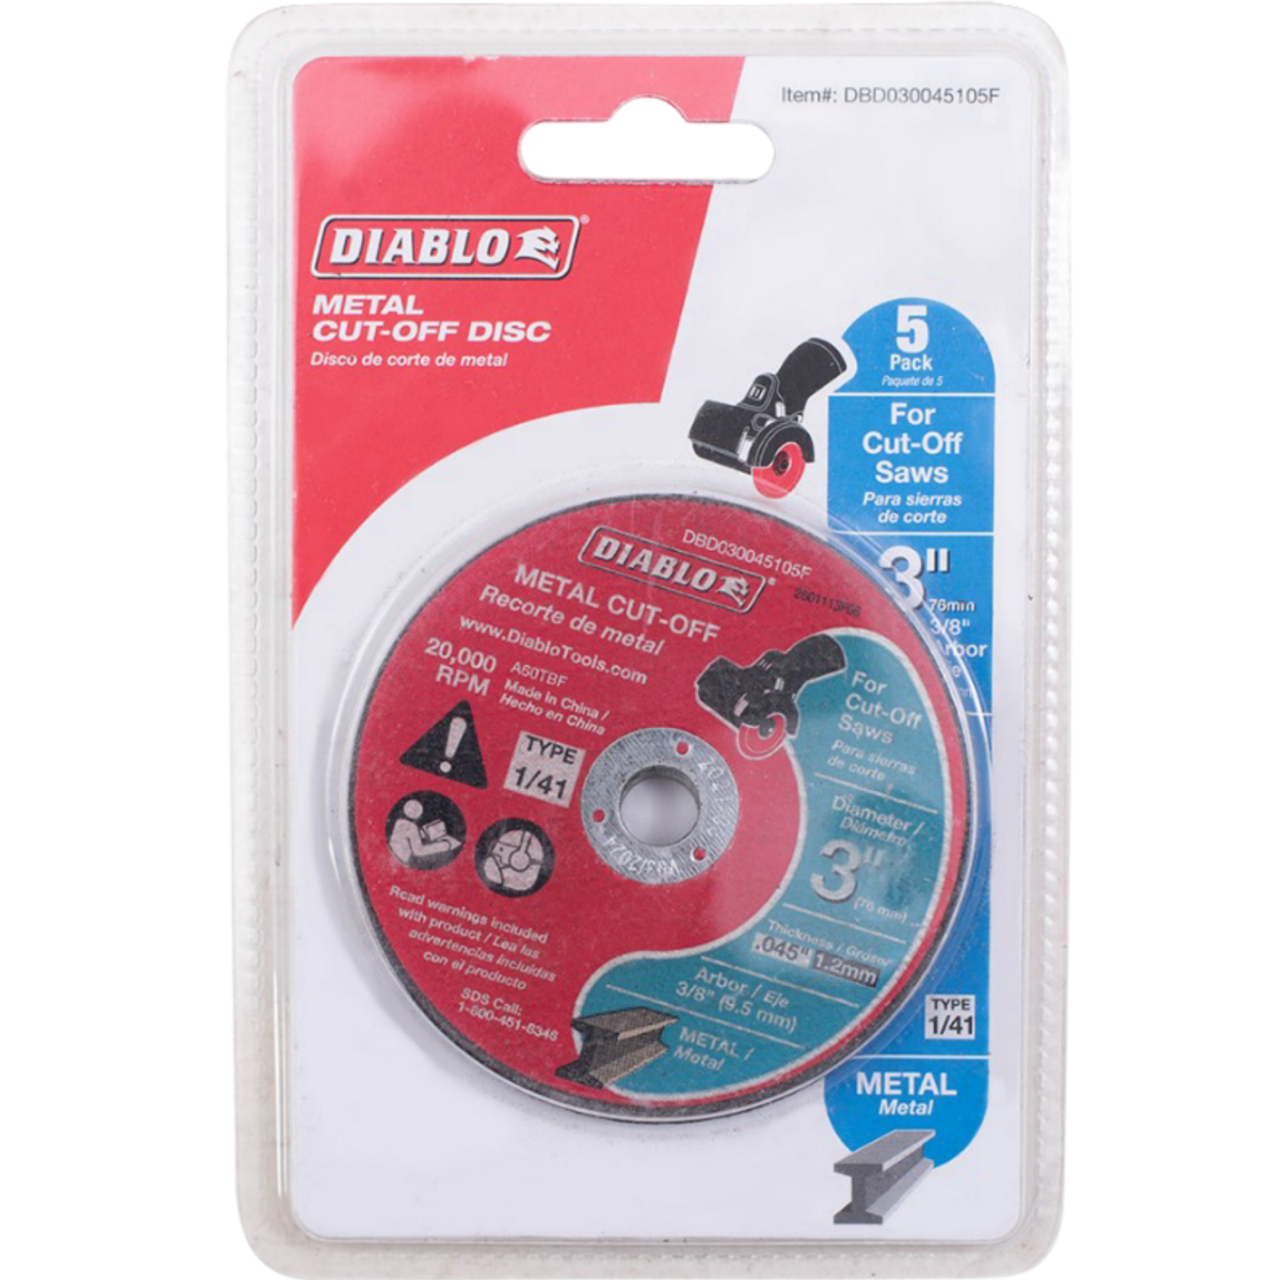 DIABLO 3 IINCH METAL CUT-OFF DISC .045 THICK - 3/8 INCH (9.5mm) ARBOR - TYPE 1 HUB - THIN KERF DESIGN - PREMIUM ALUMINUM OXIDE BLEND FOR USE ON METAL MATERIALS - 20,000 MAX RPM - 5 PACK